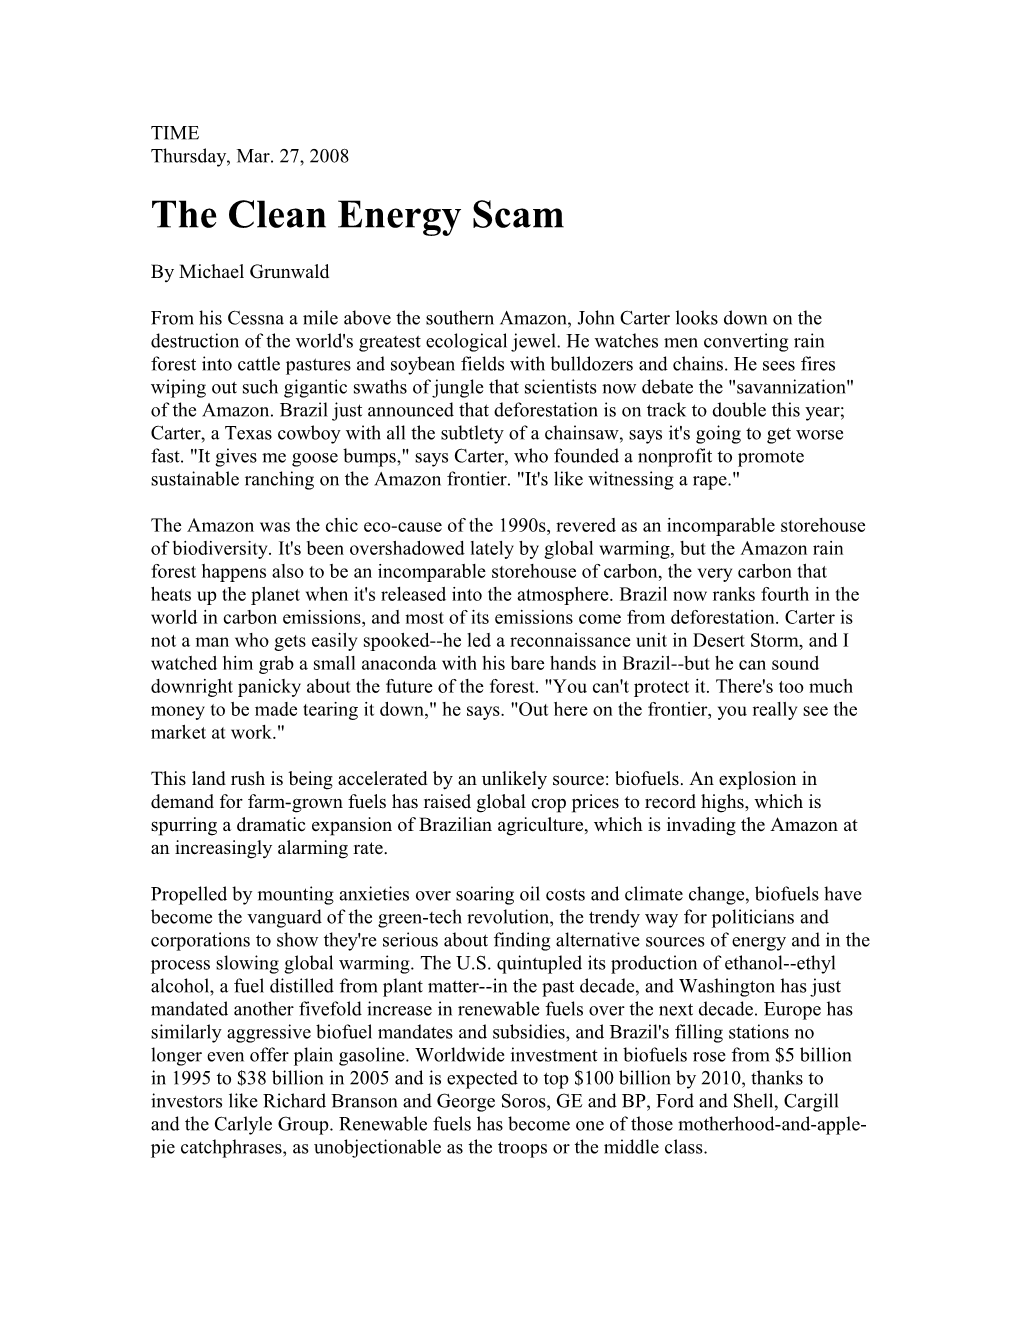 The Clean Energy Scam